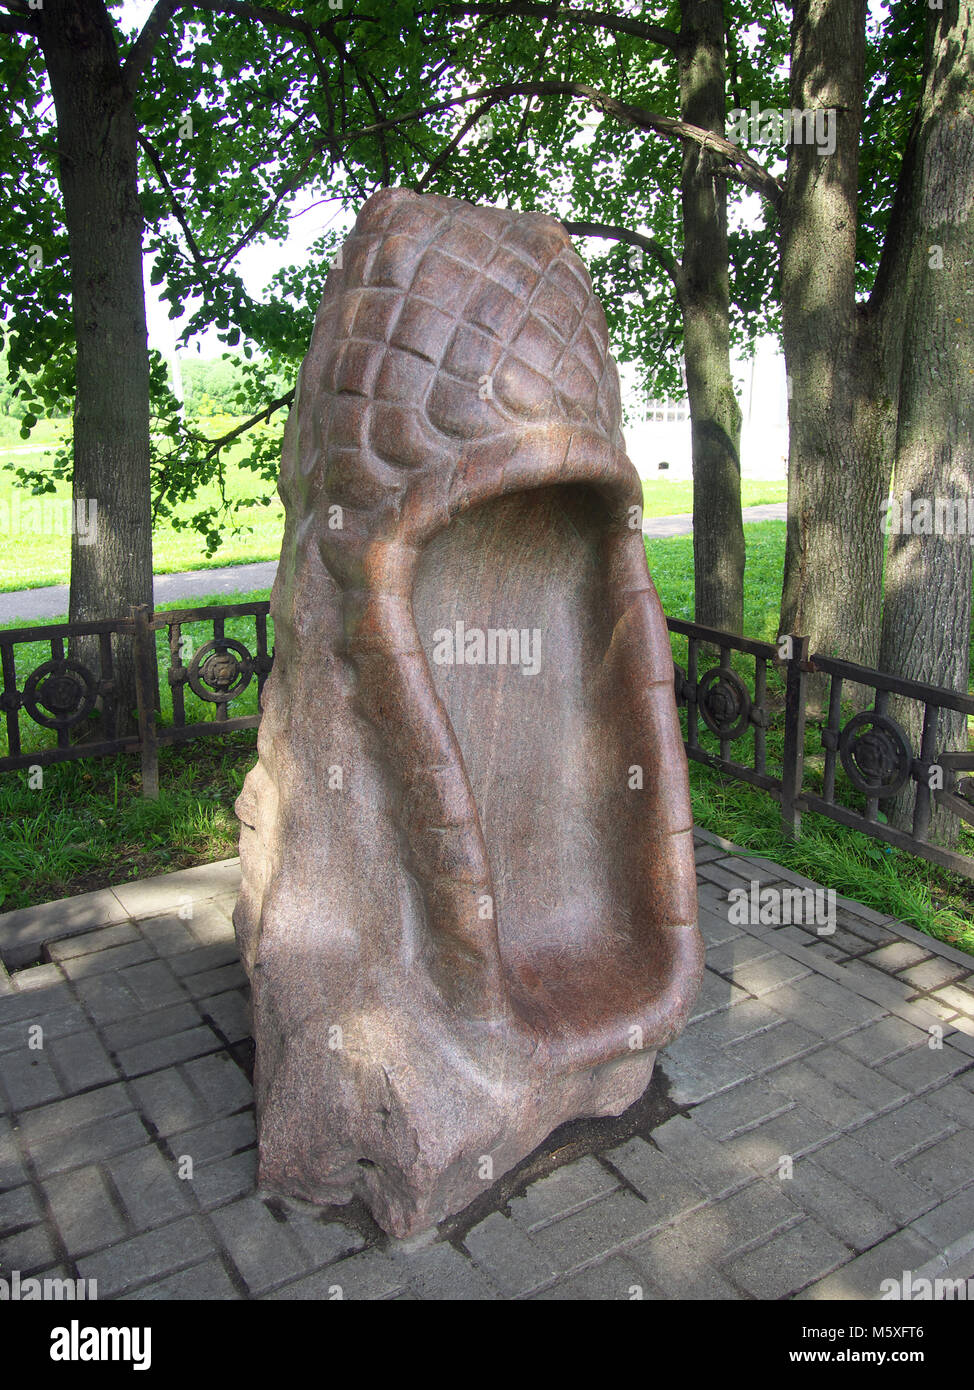 Vyazma, Russia - July 12, 2014: Monument to Russian bast shoes in the Soviet area of the city Vyazma Stock Photo